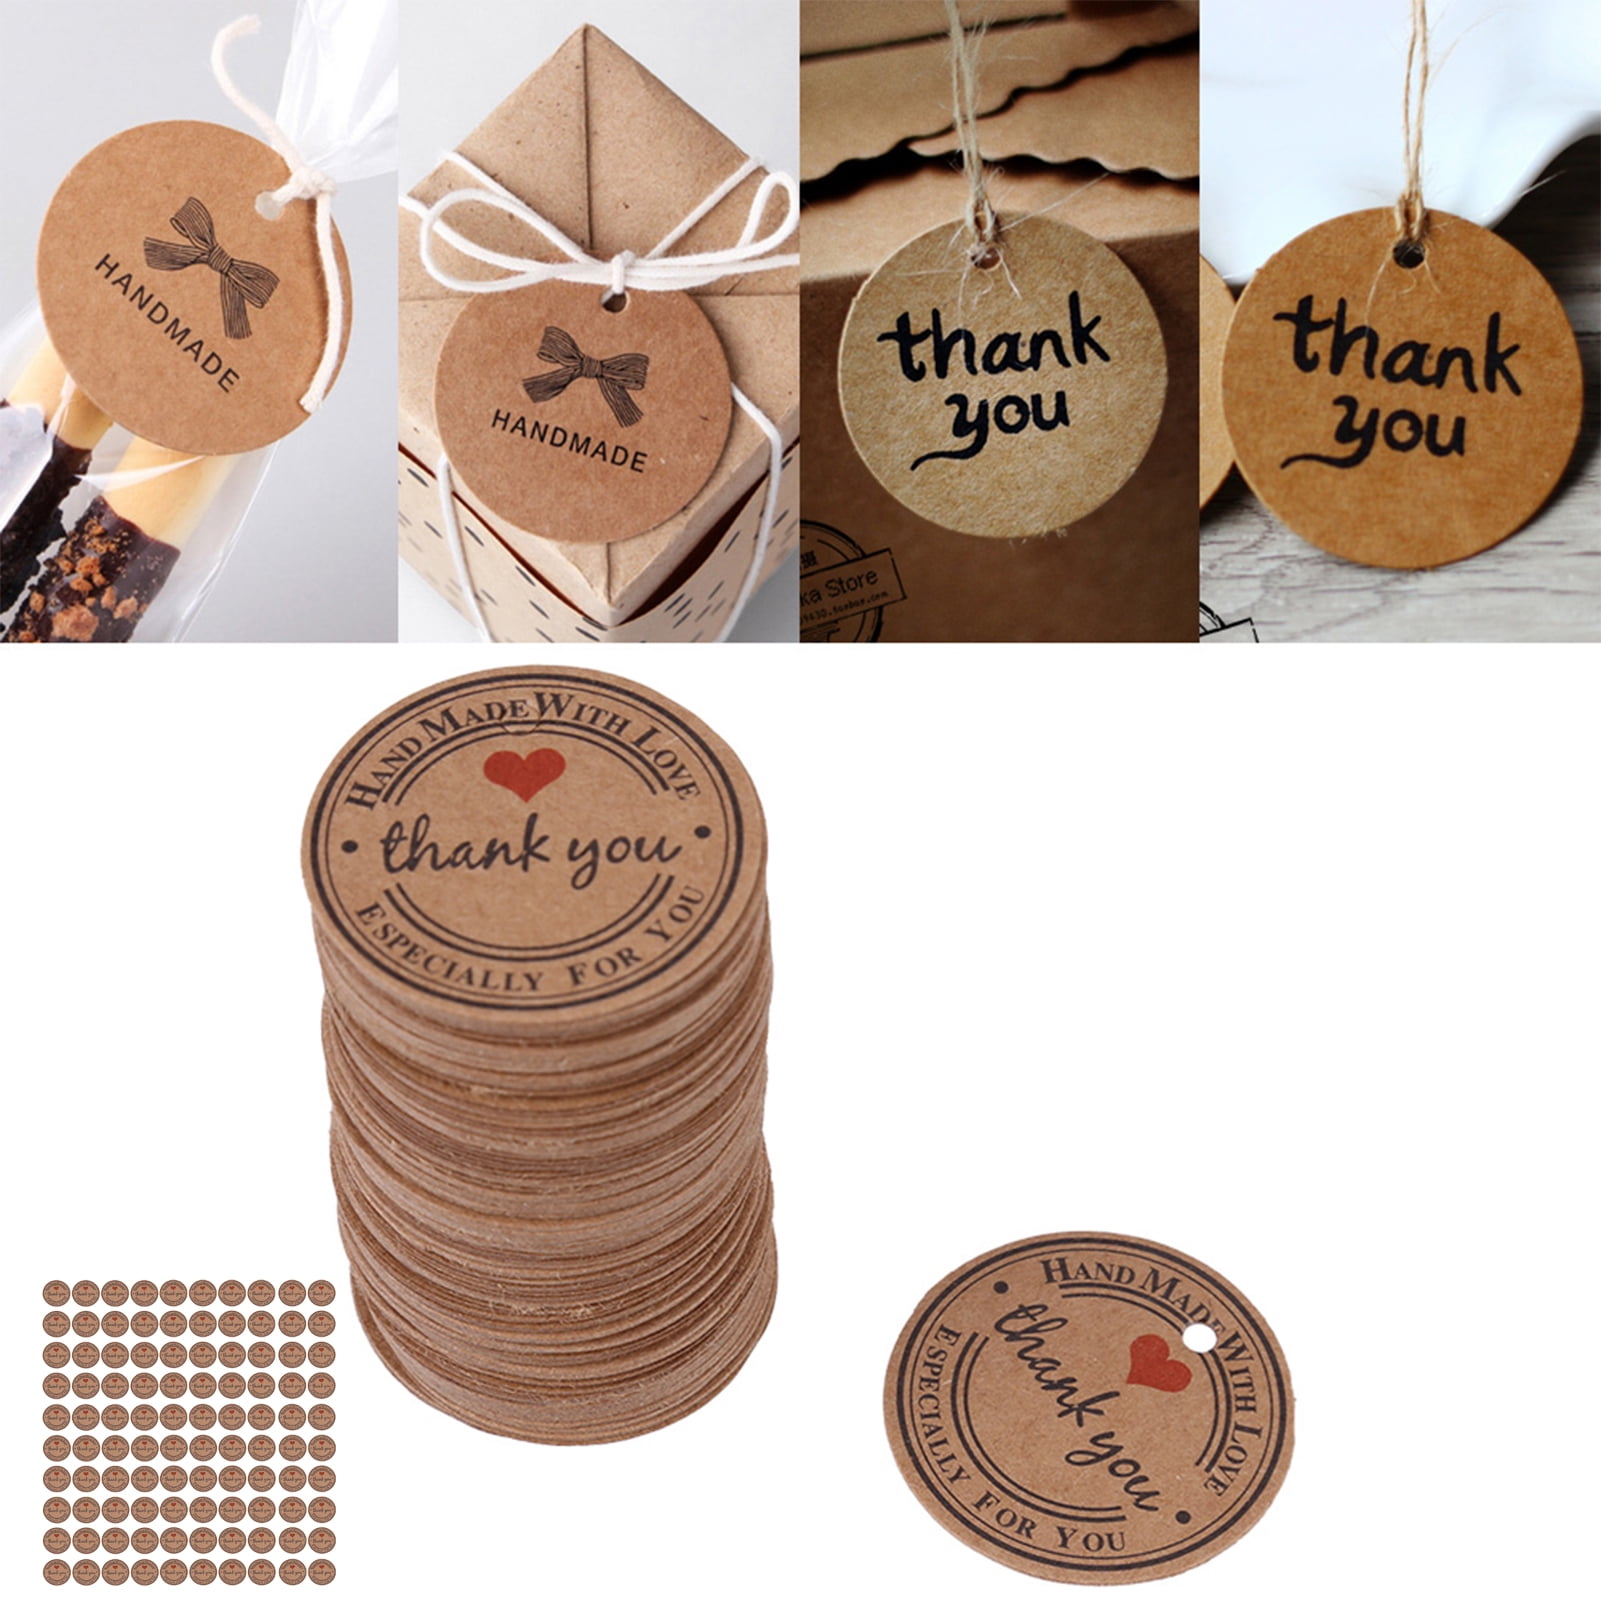 Handmade Love Labels Hang Tags 100pcs / 200pcs Blank Kraft Paper With 20m /  40m Strings Tag Labels Party Christmas Favors Gifts - Garment Labels -  AliExpress